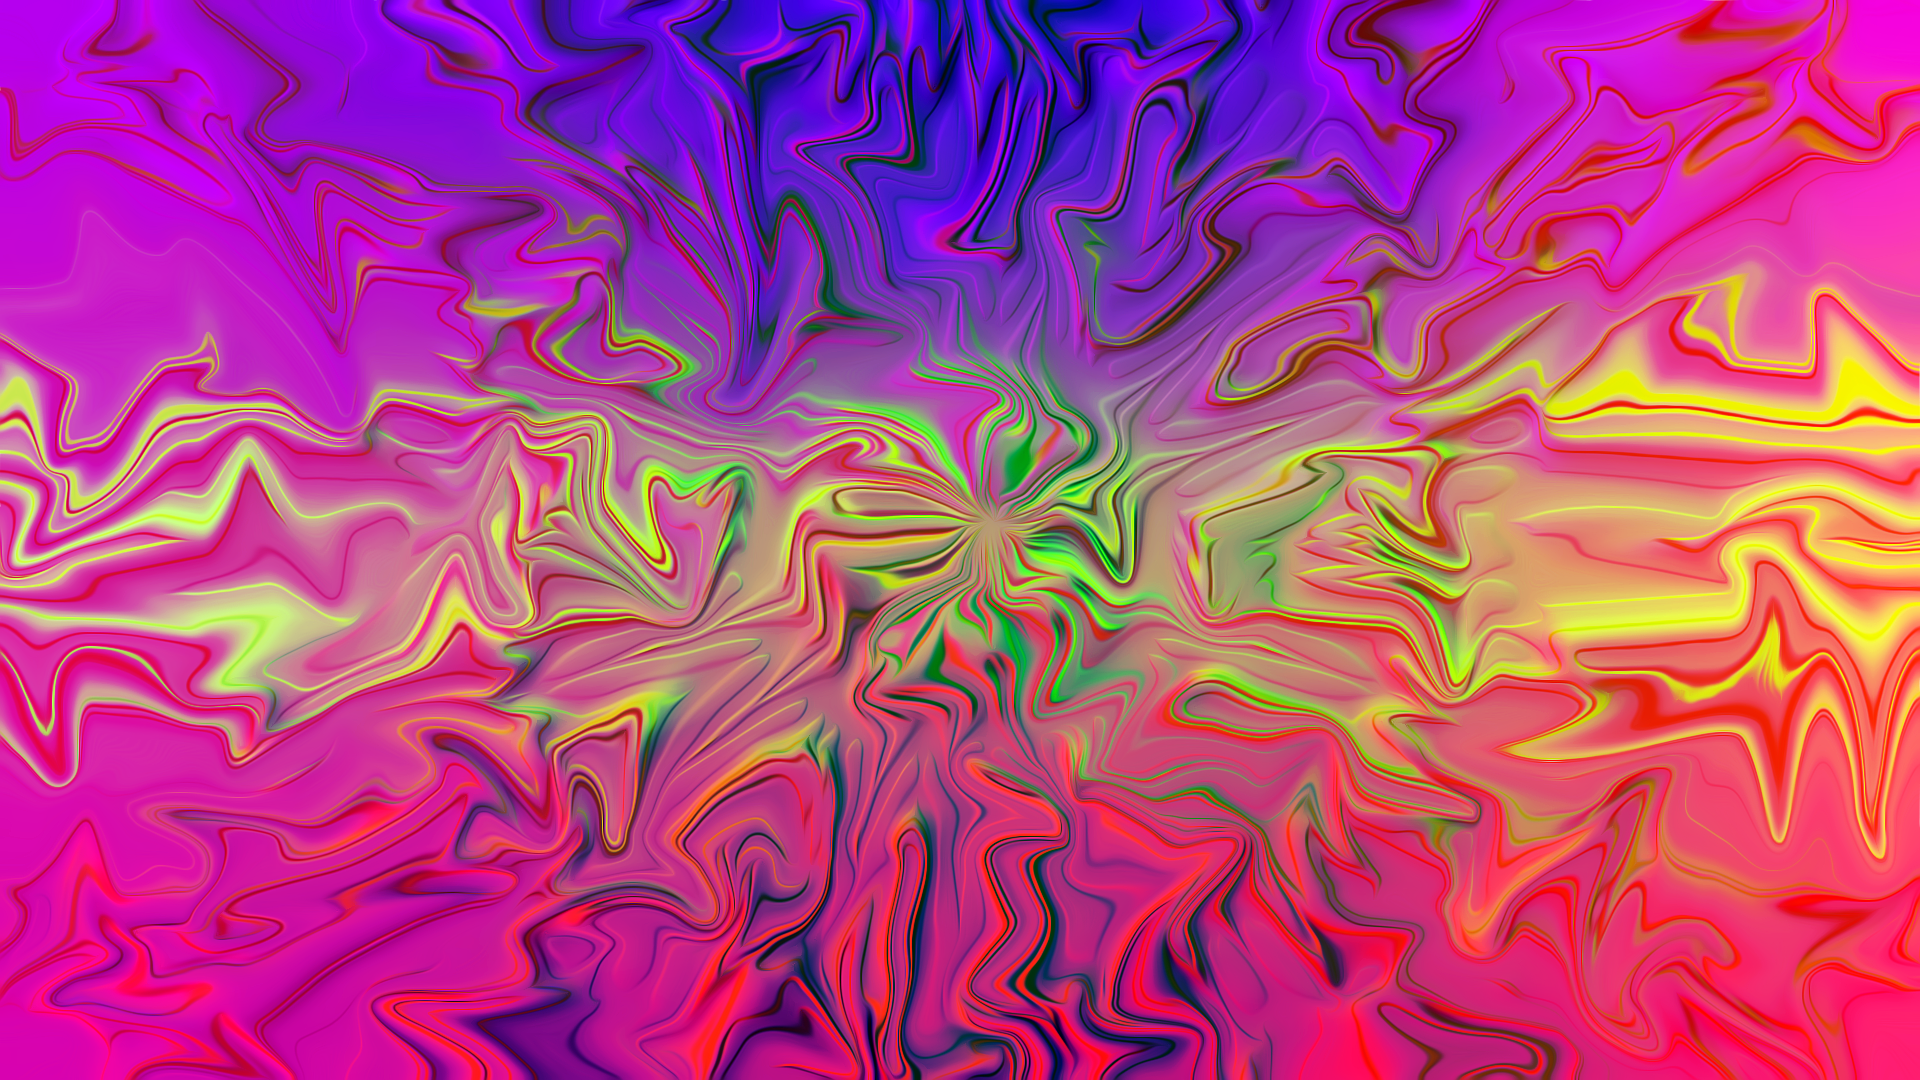 Abstract Swirls Colorful 1920x1080